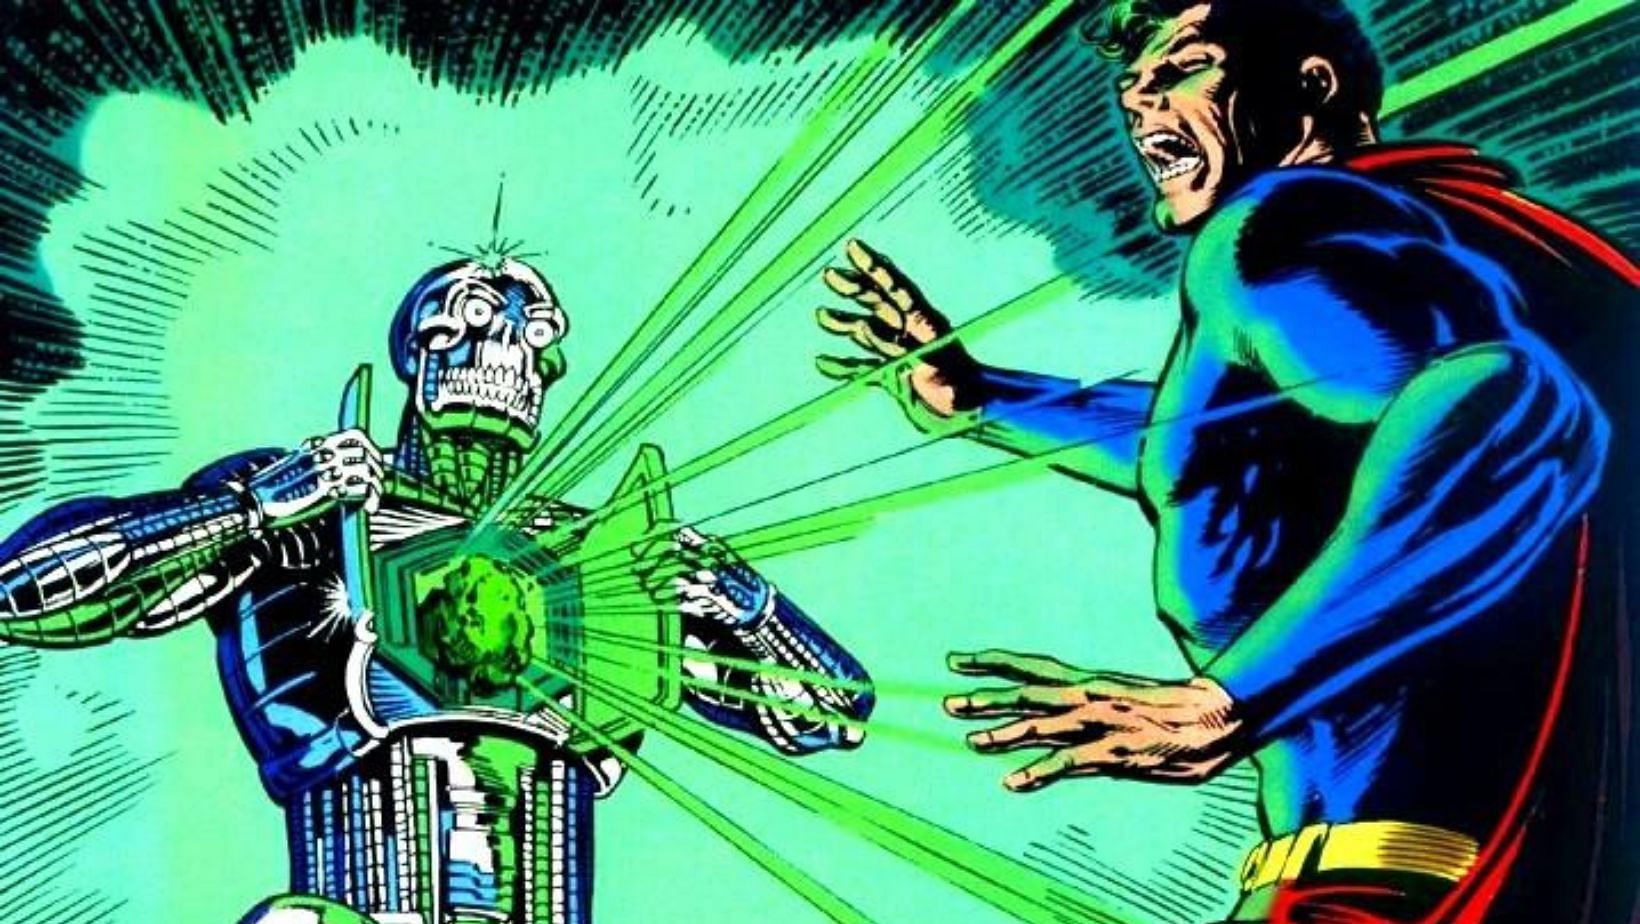 The Man of Tomorrow weakened by Metallo&#039;s kryptonite heart and struggling to fight while his body is malfunctioning (image via DC Comics)